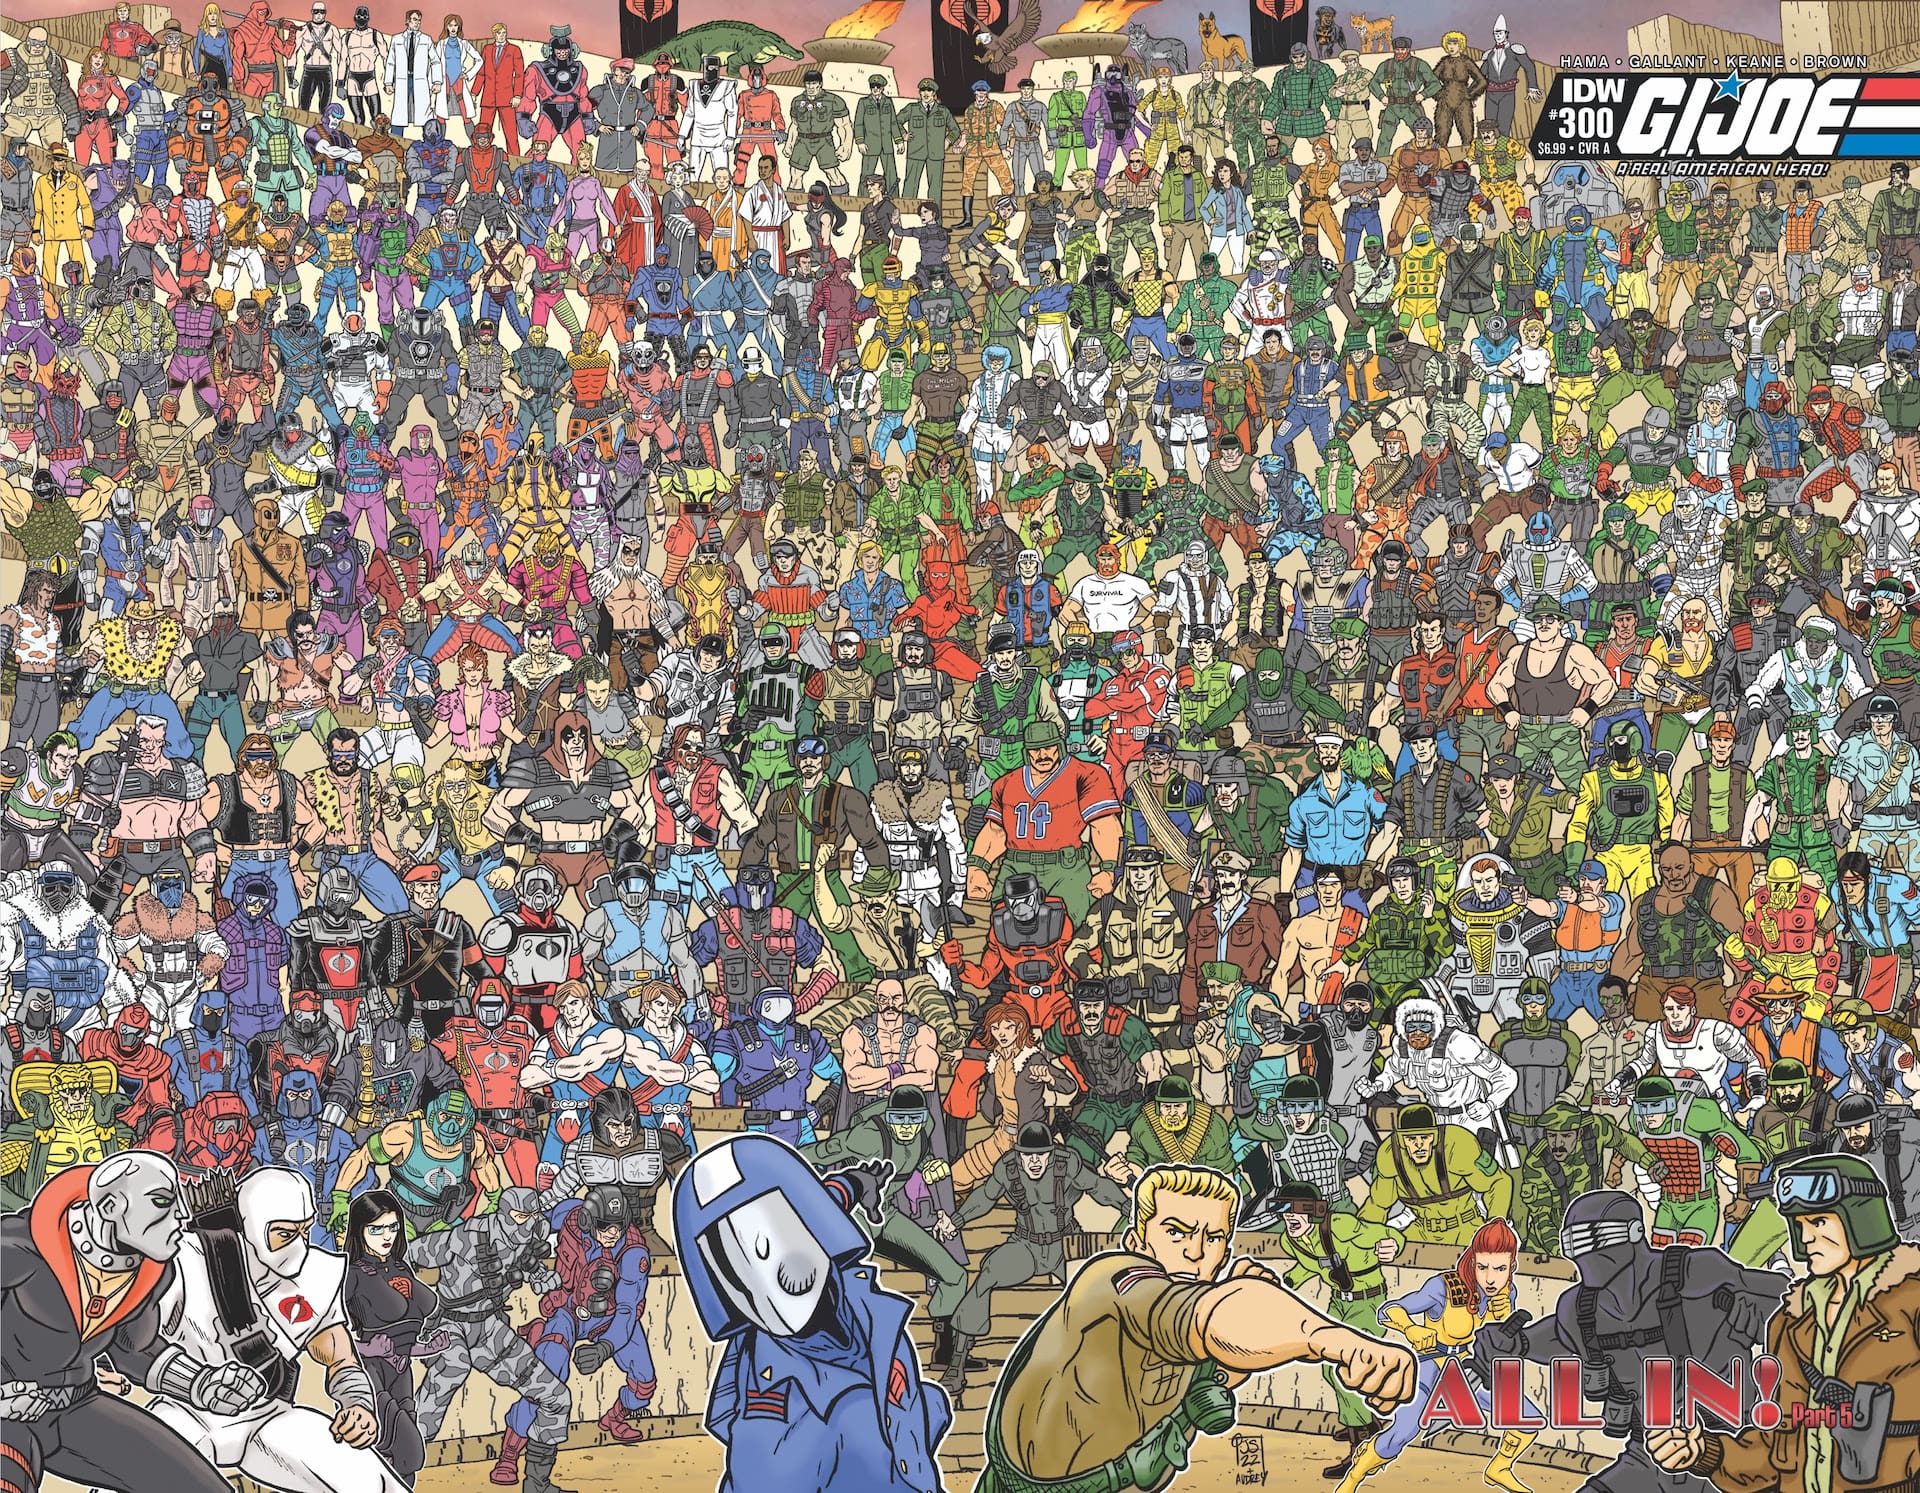 'G.I. JOE: A Real American Hero' #300 breaks record and marks the end of the series